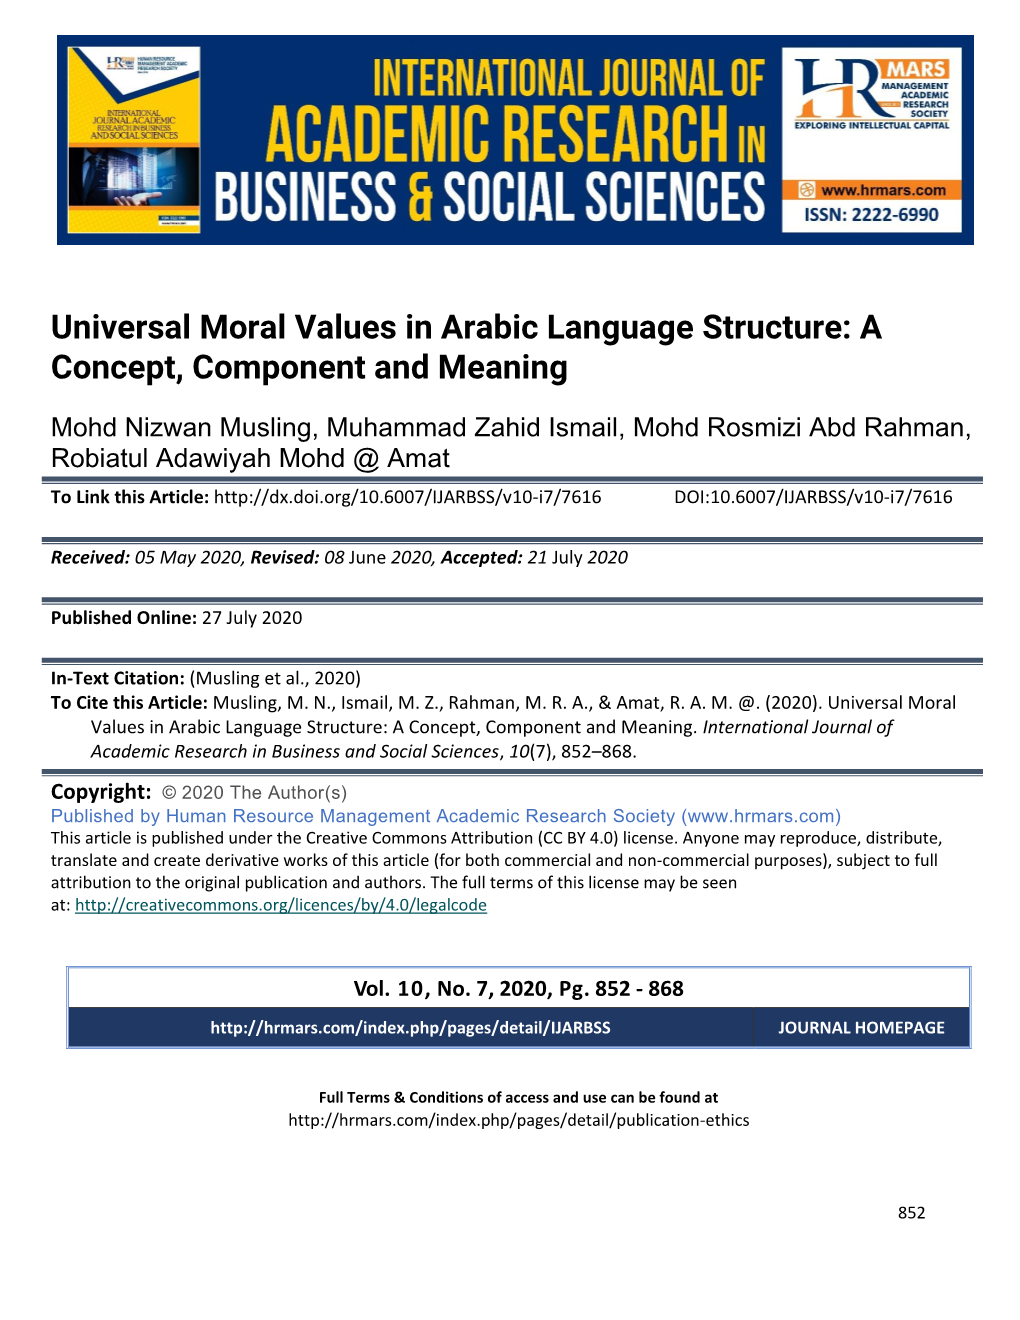 Universal Moral Values in Arabic Language Structure: a Concept, Component and Meaning